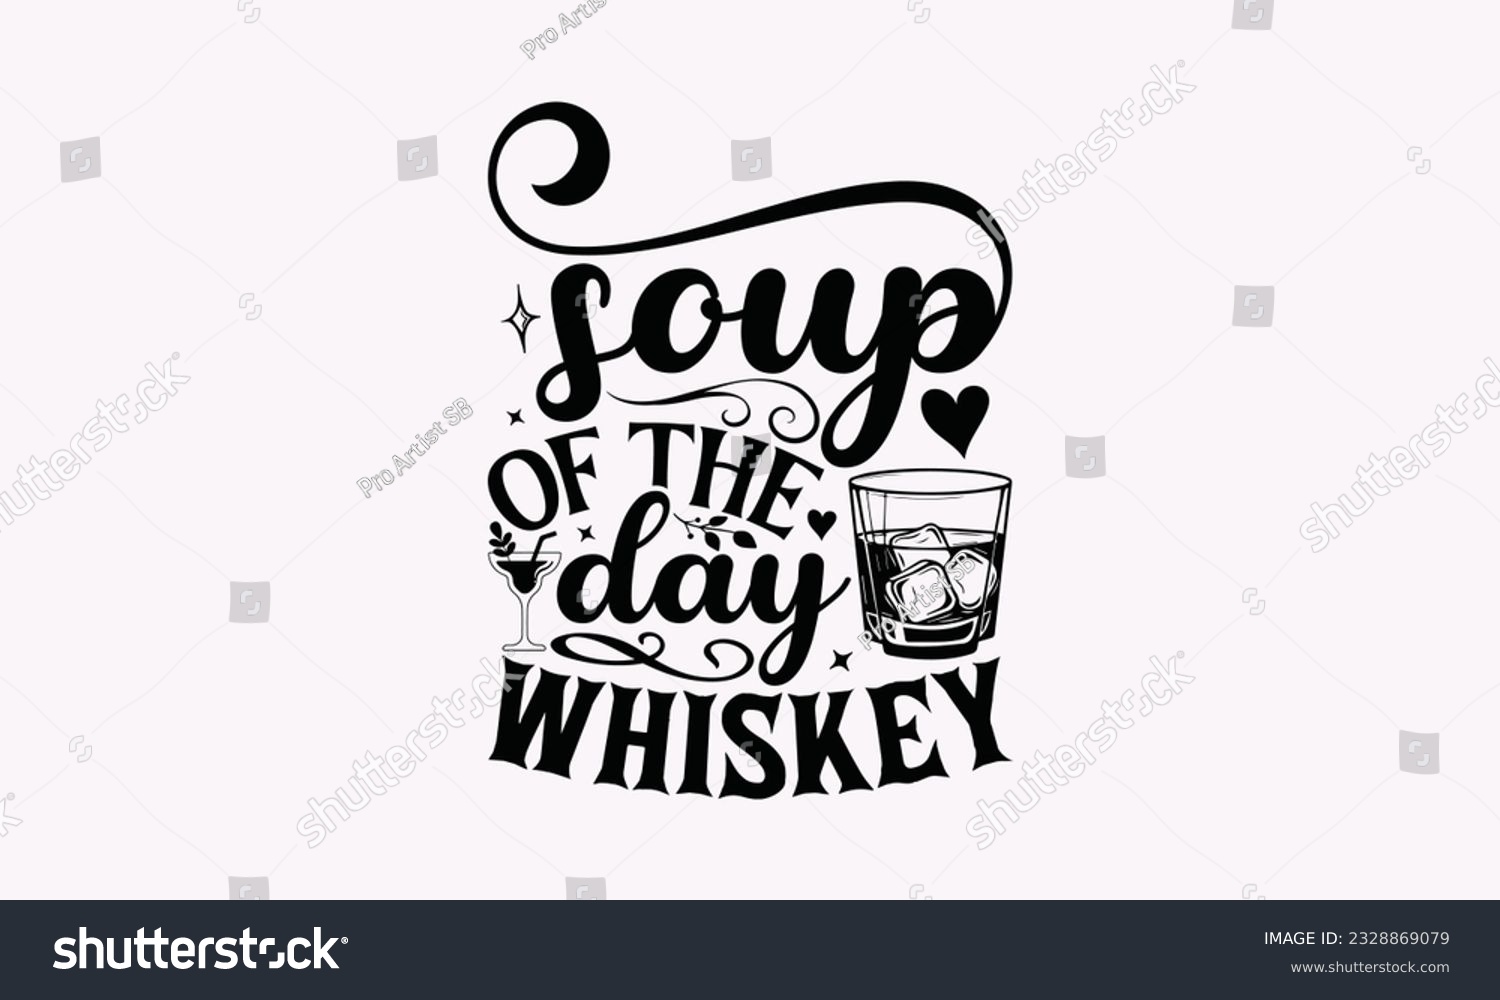 SVG of Soup Of The Day Whiskey - Alcohol SVG Design, Cheer Quotes, Hand drawn lettering phrase, Isolated on white background. svg